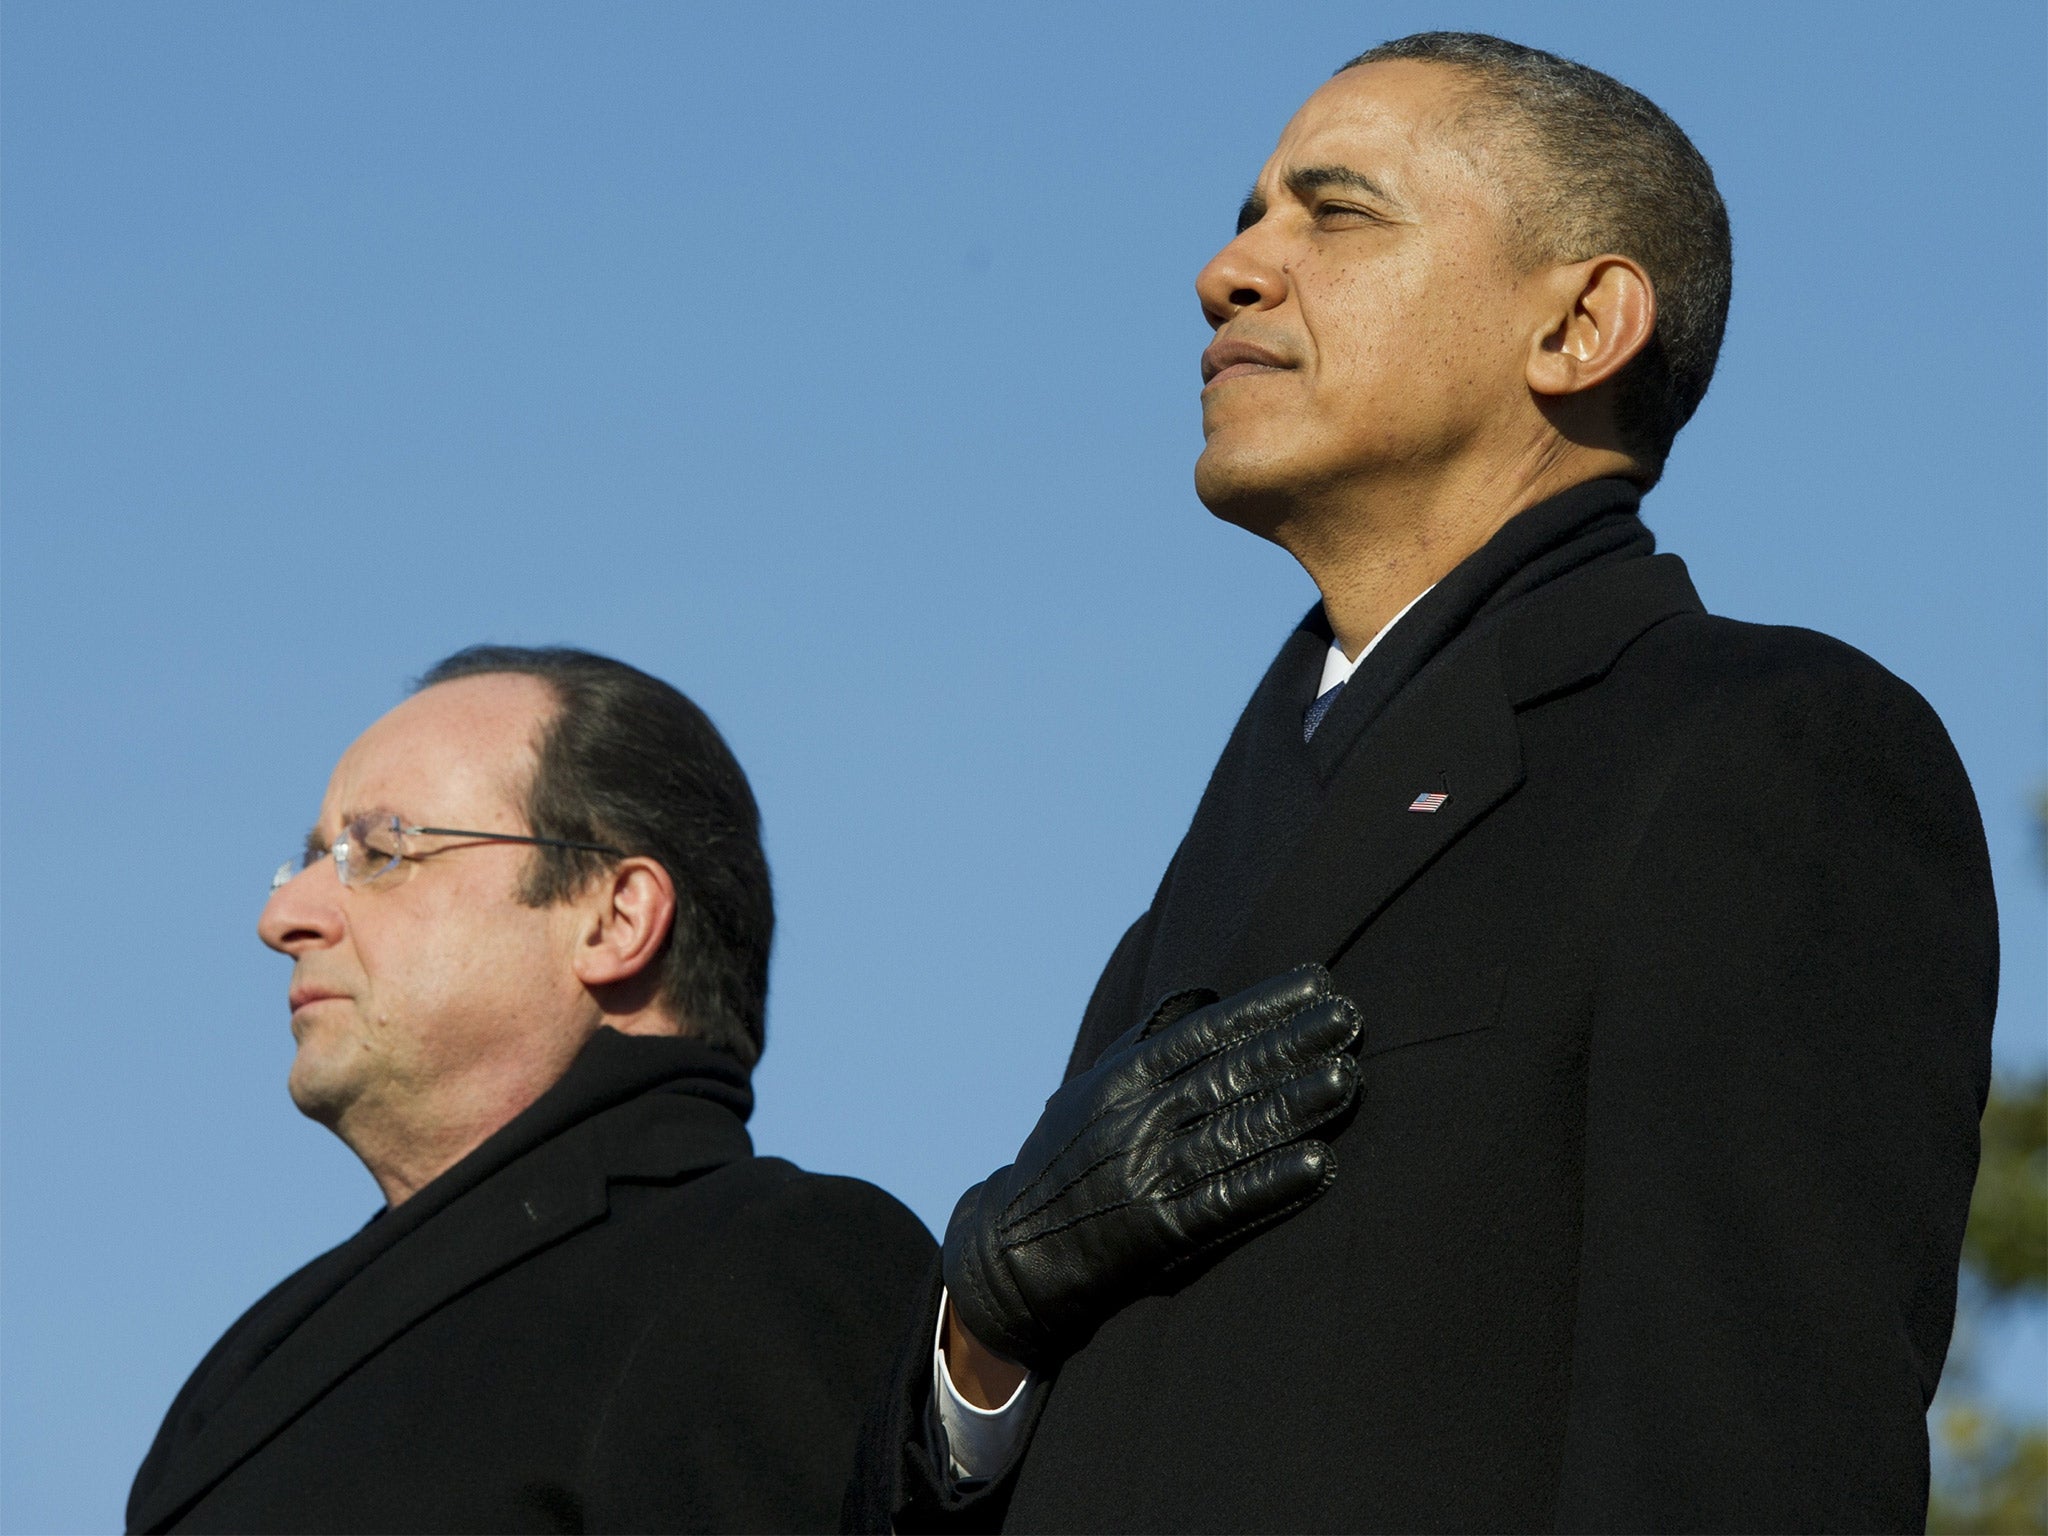 The French President spoke with Barack Obama to discuss reports that the US spied on him and two predecessors